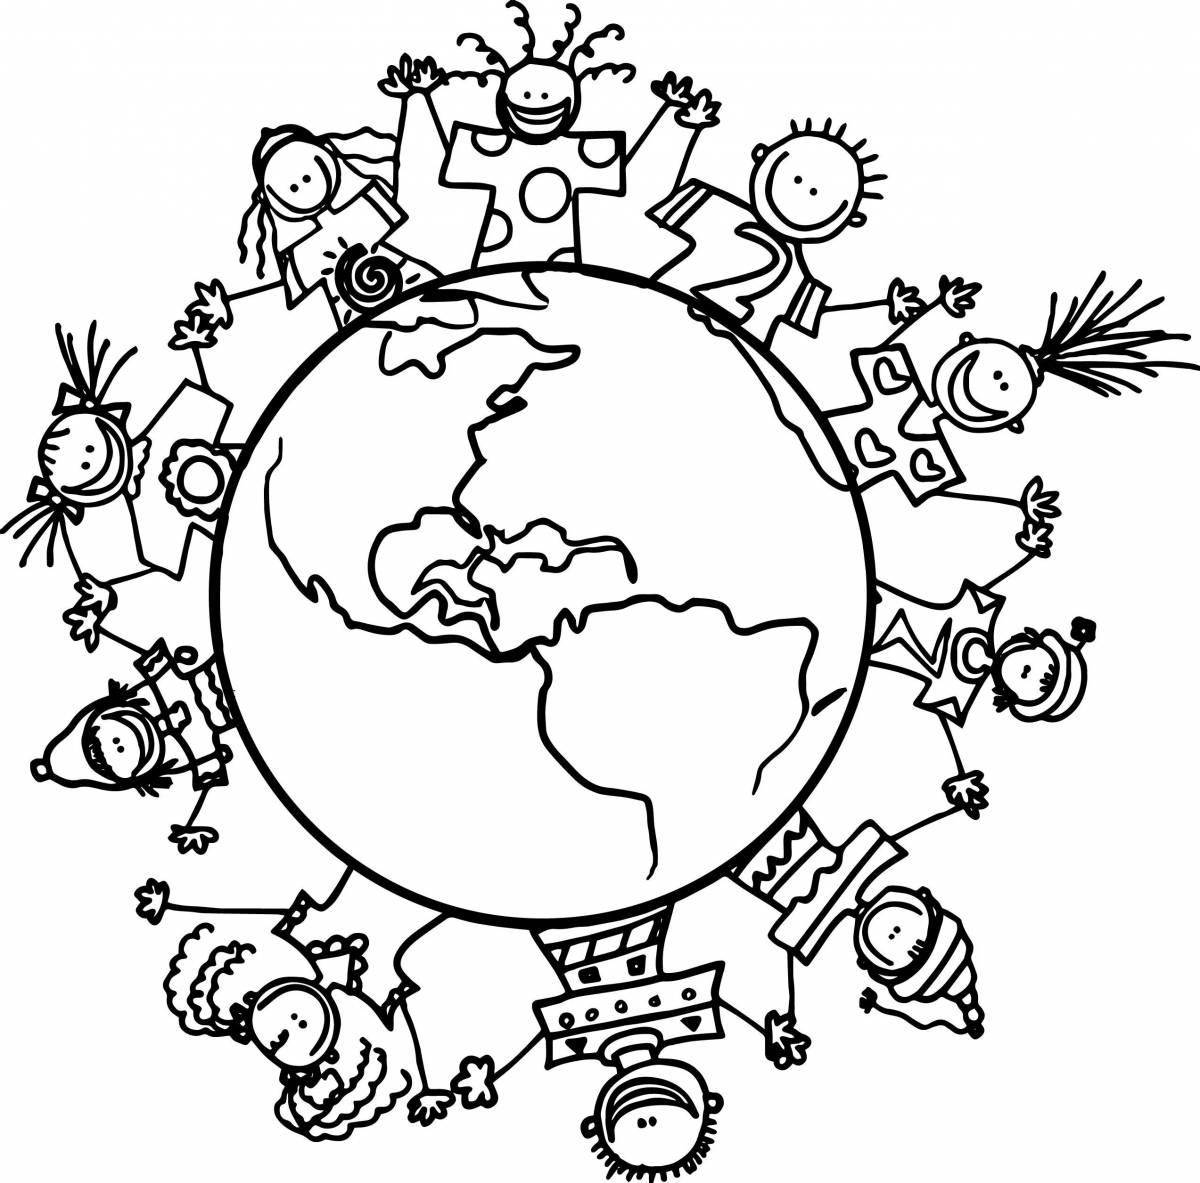 Fun coloring book globe for children 6-7 years old